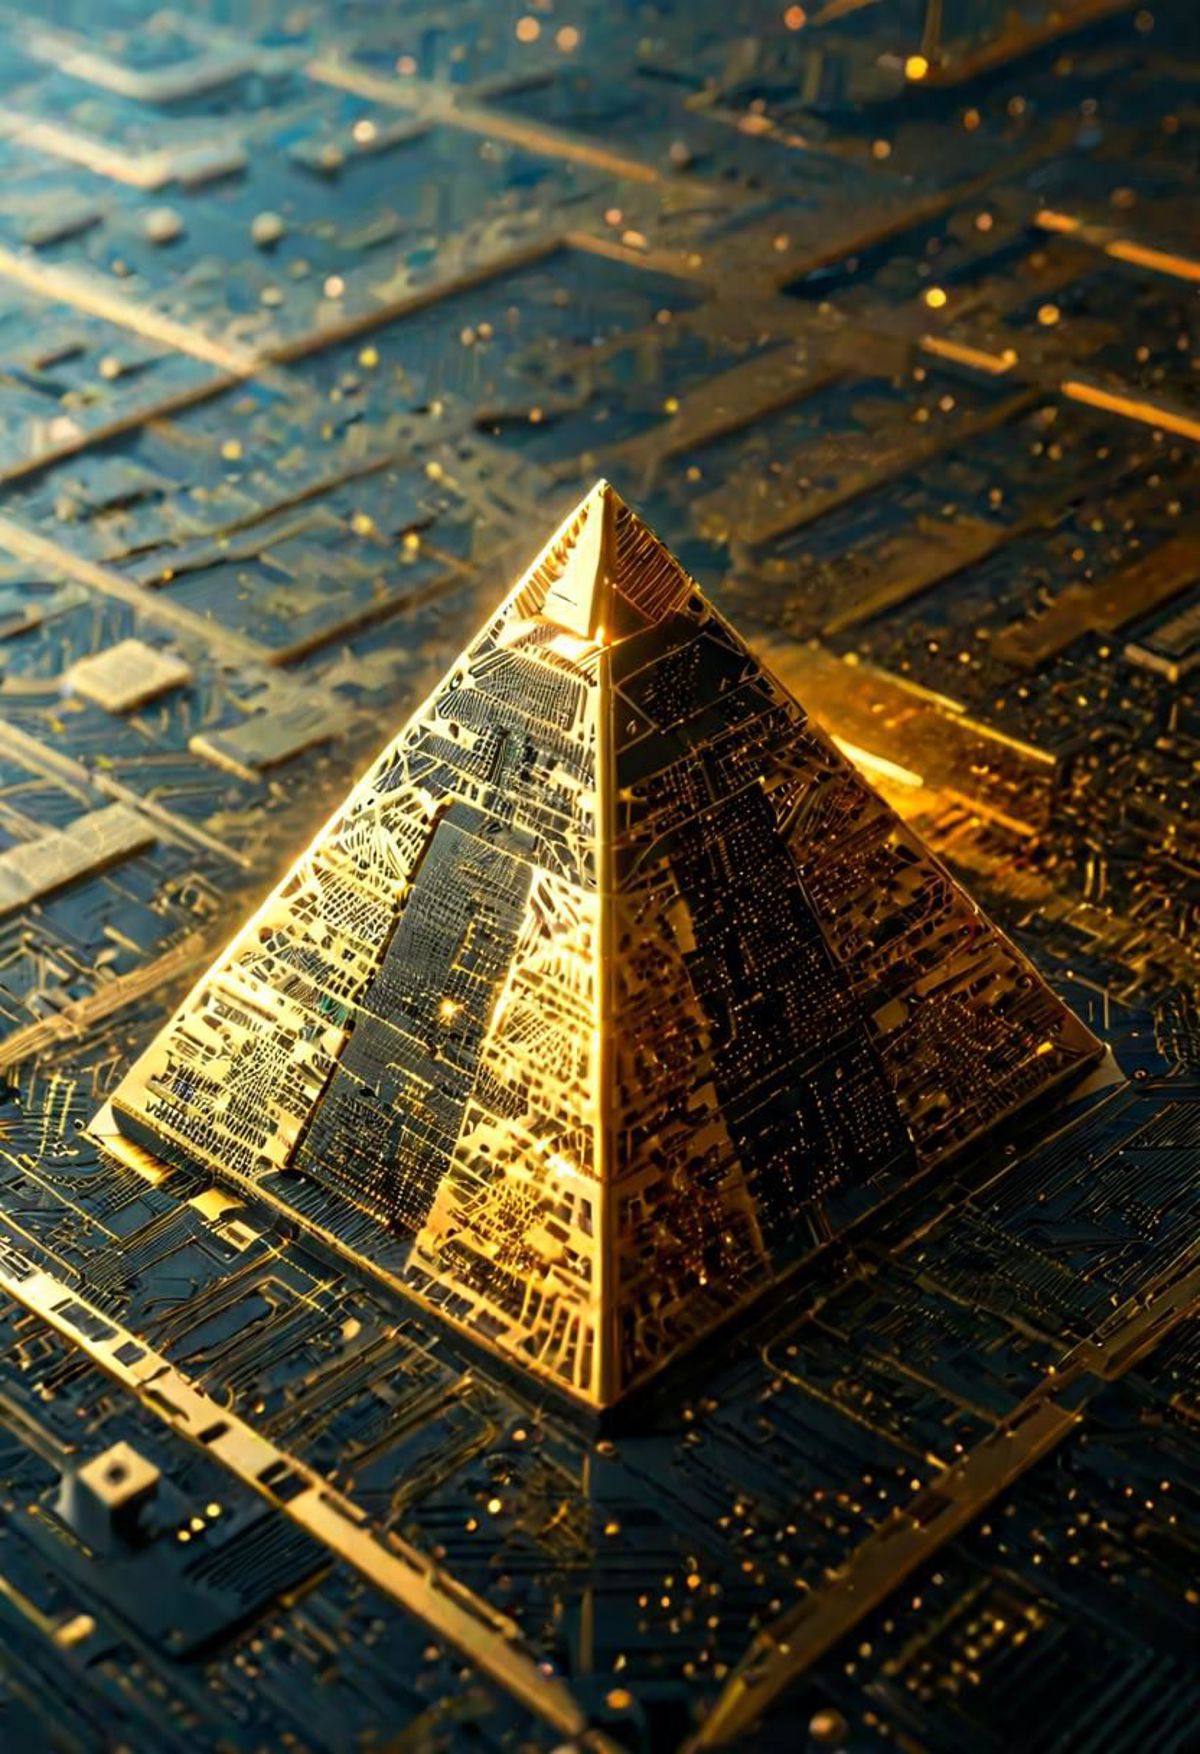 A golden pyramid on top of a circuit board.